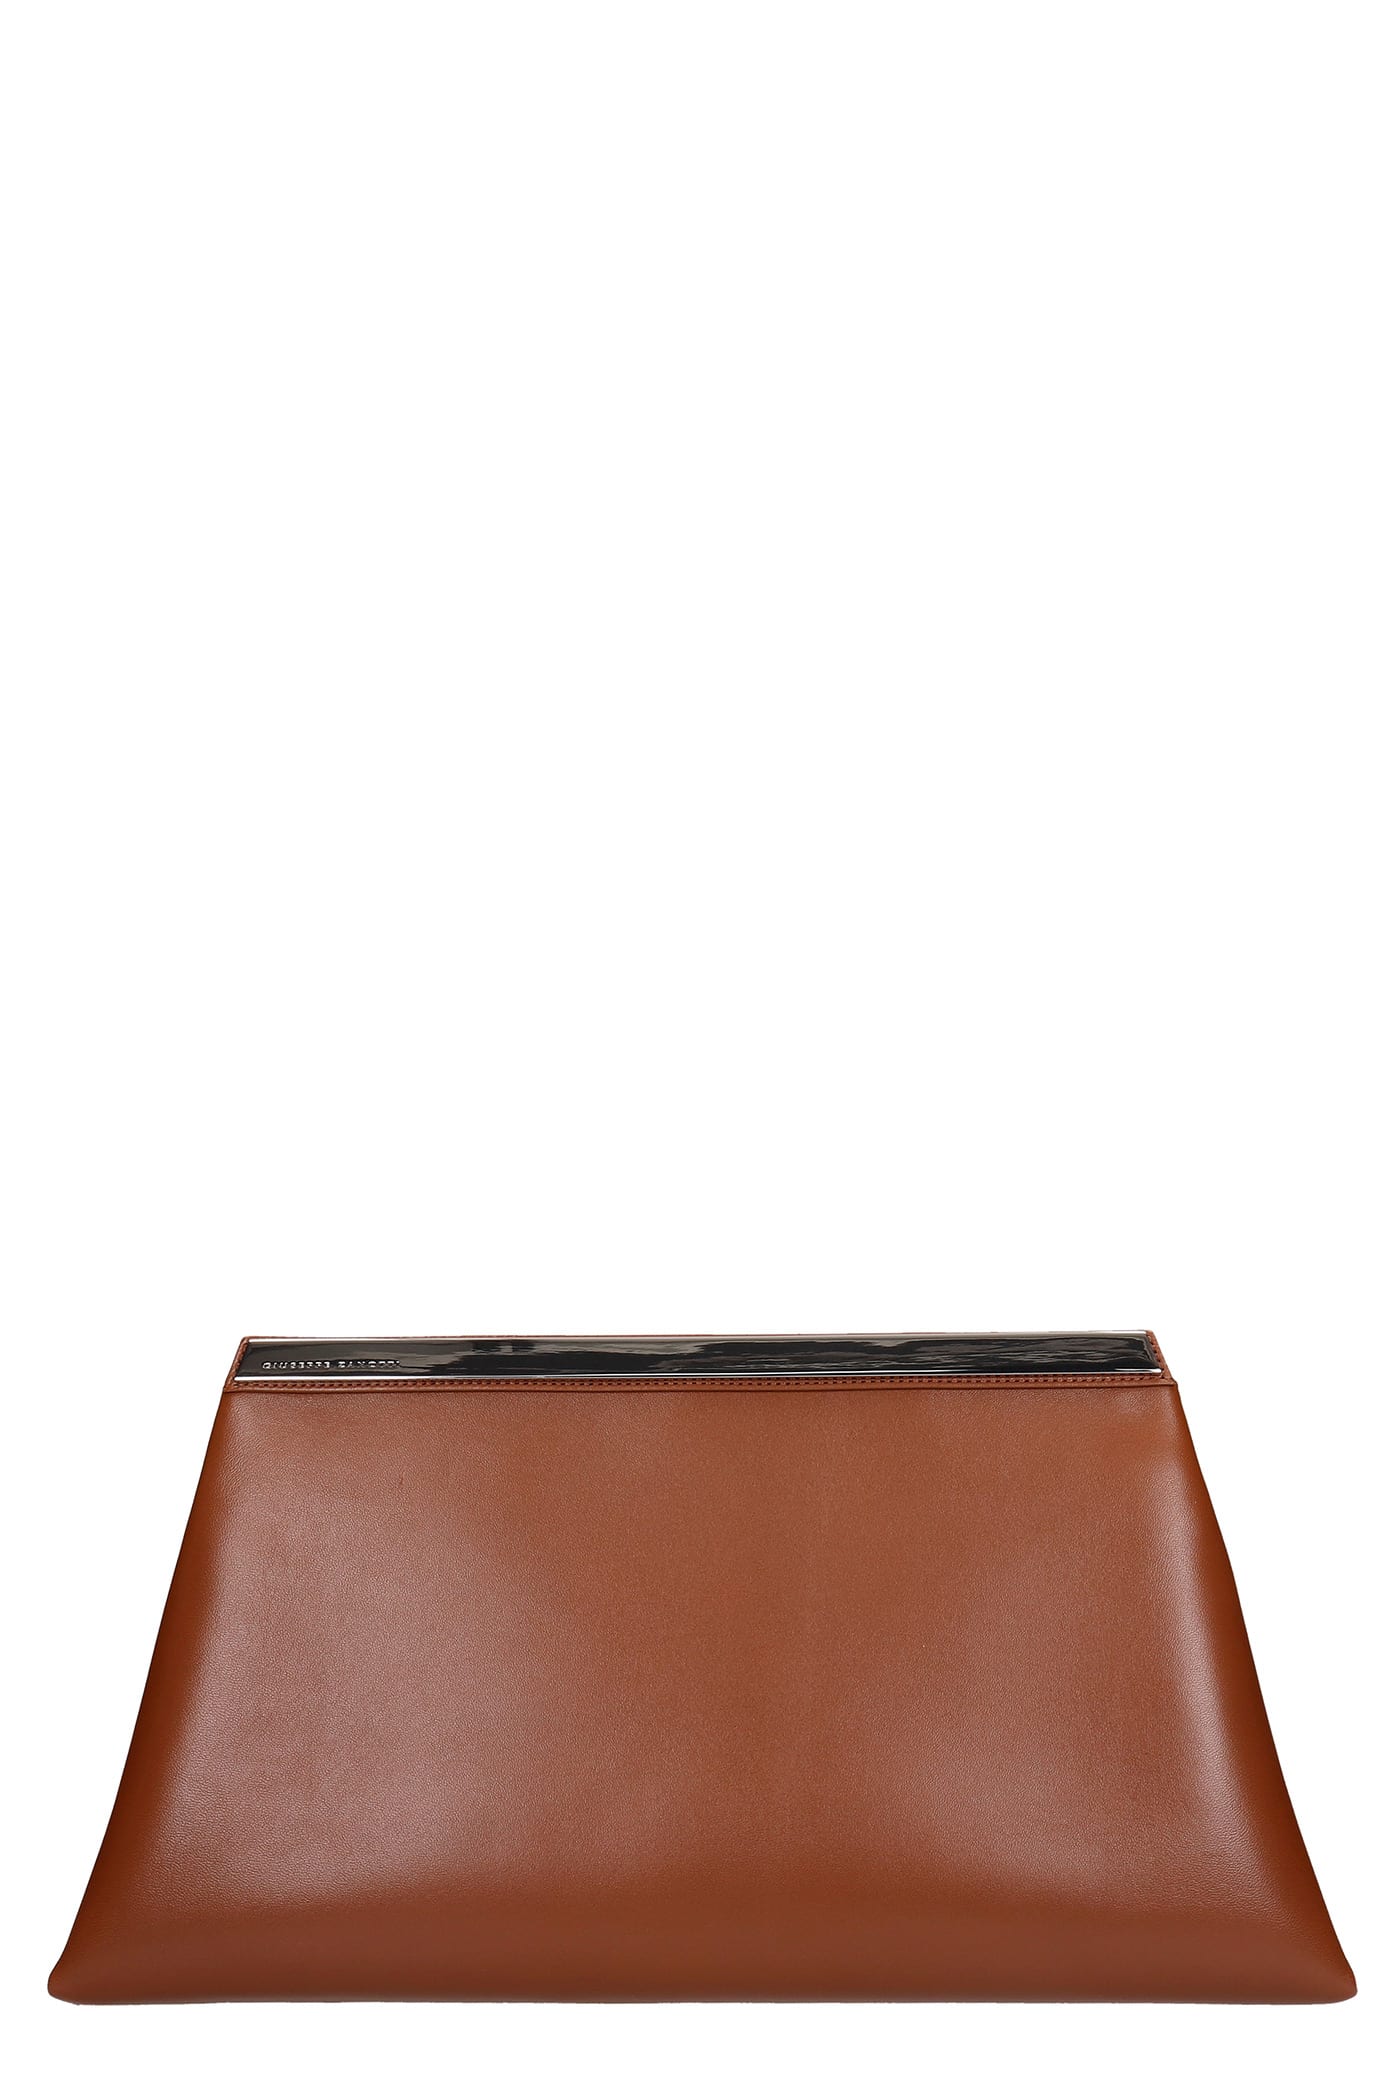 Giuseppe Zanotti Sharyl Clutch In Leather Color Leather